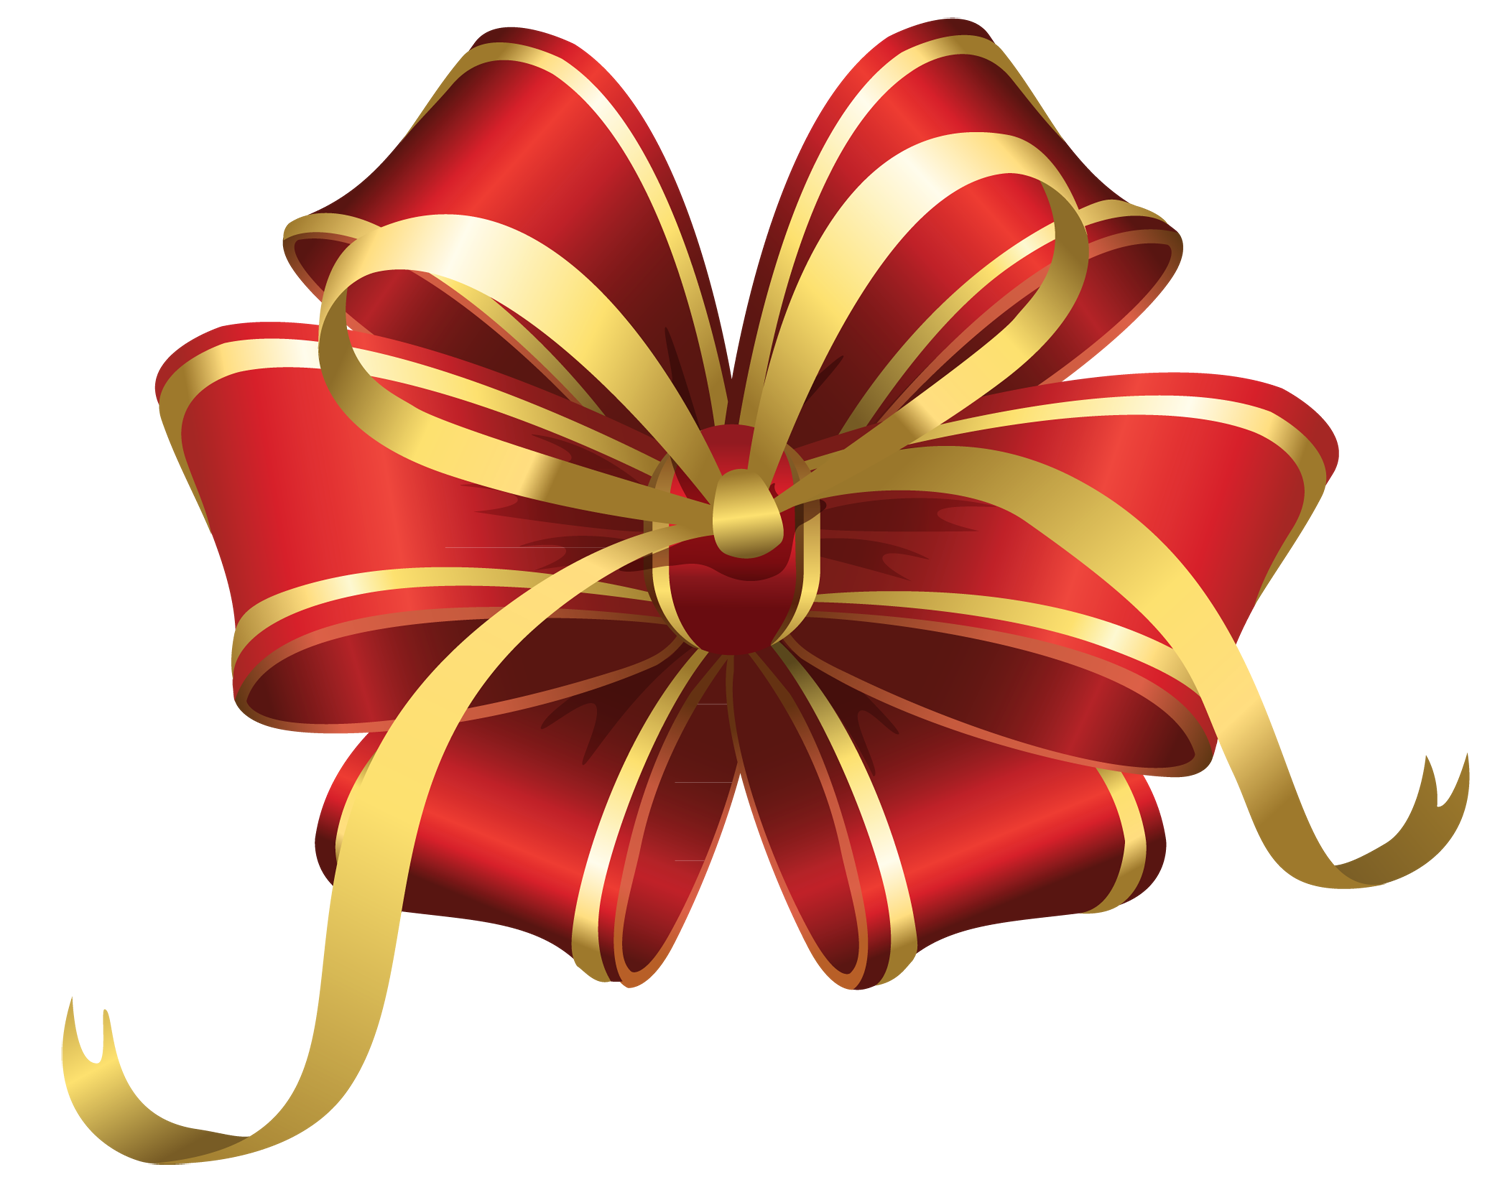 Red Christmas Bow Clip Art